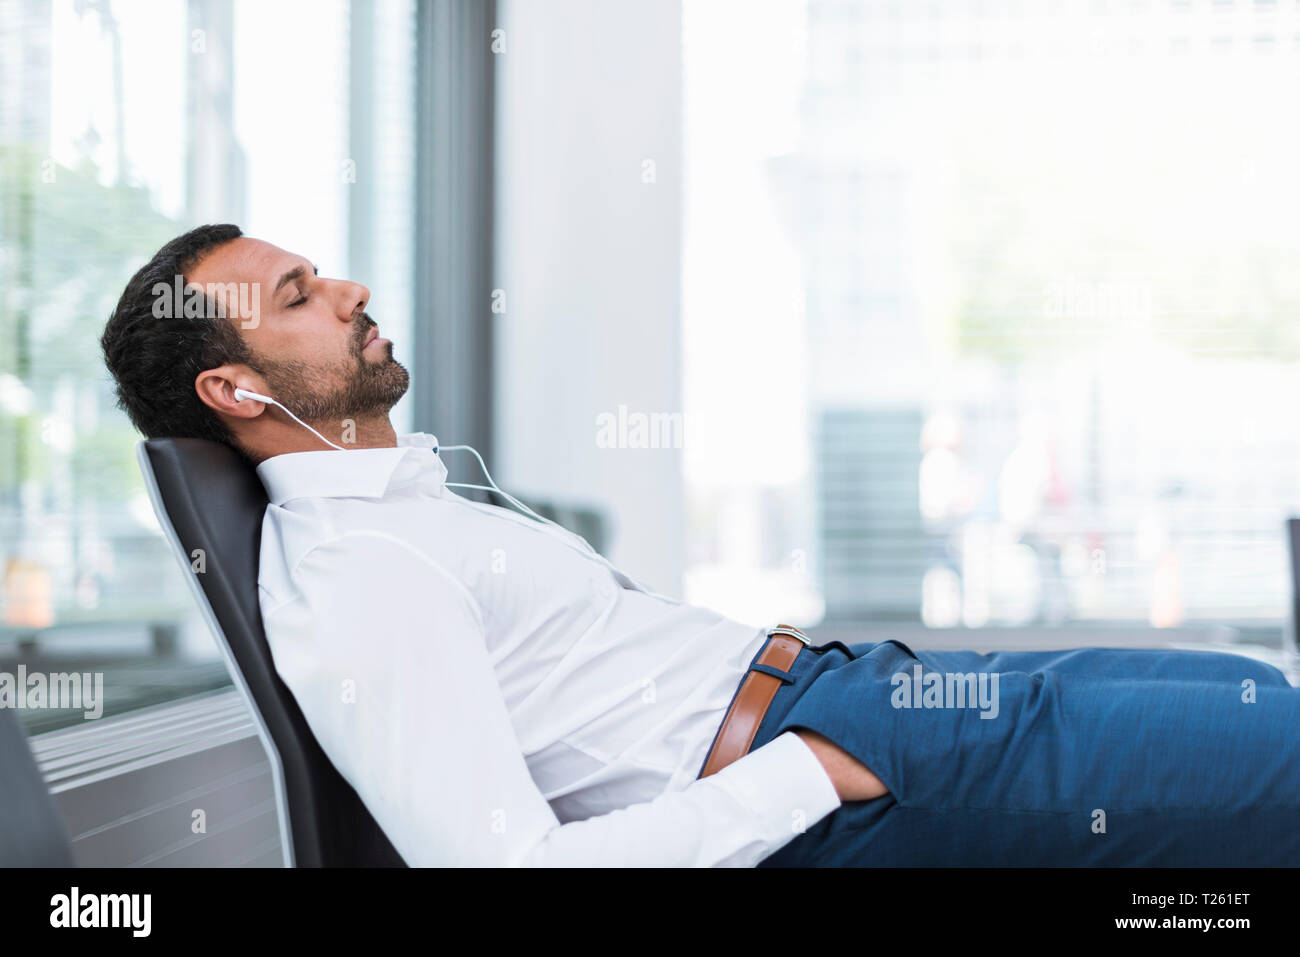 Businessman with earphones, closed eyes Stock Photo